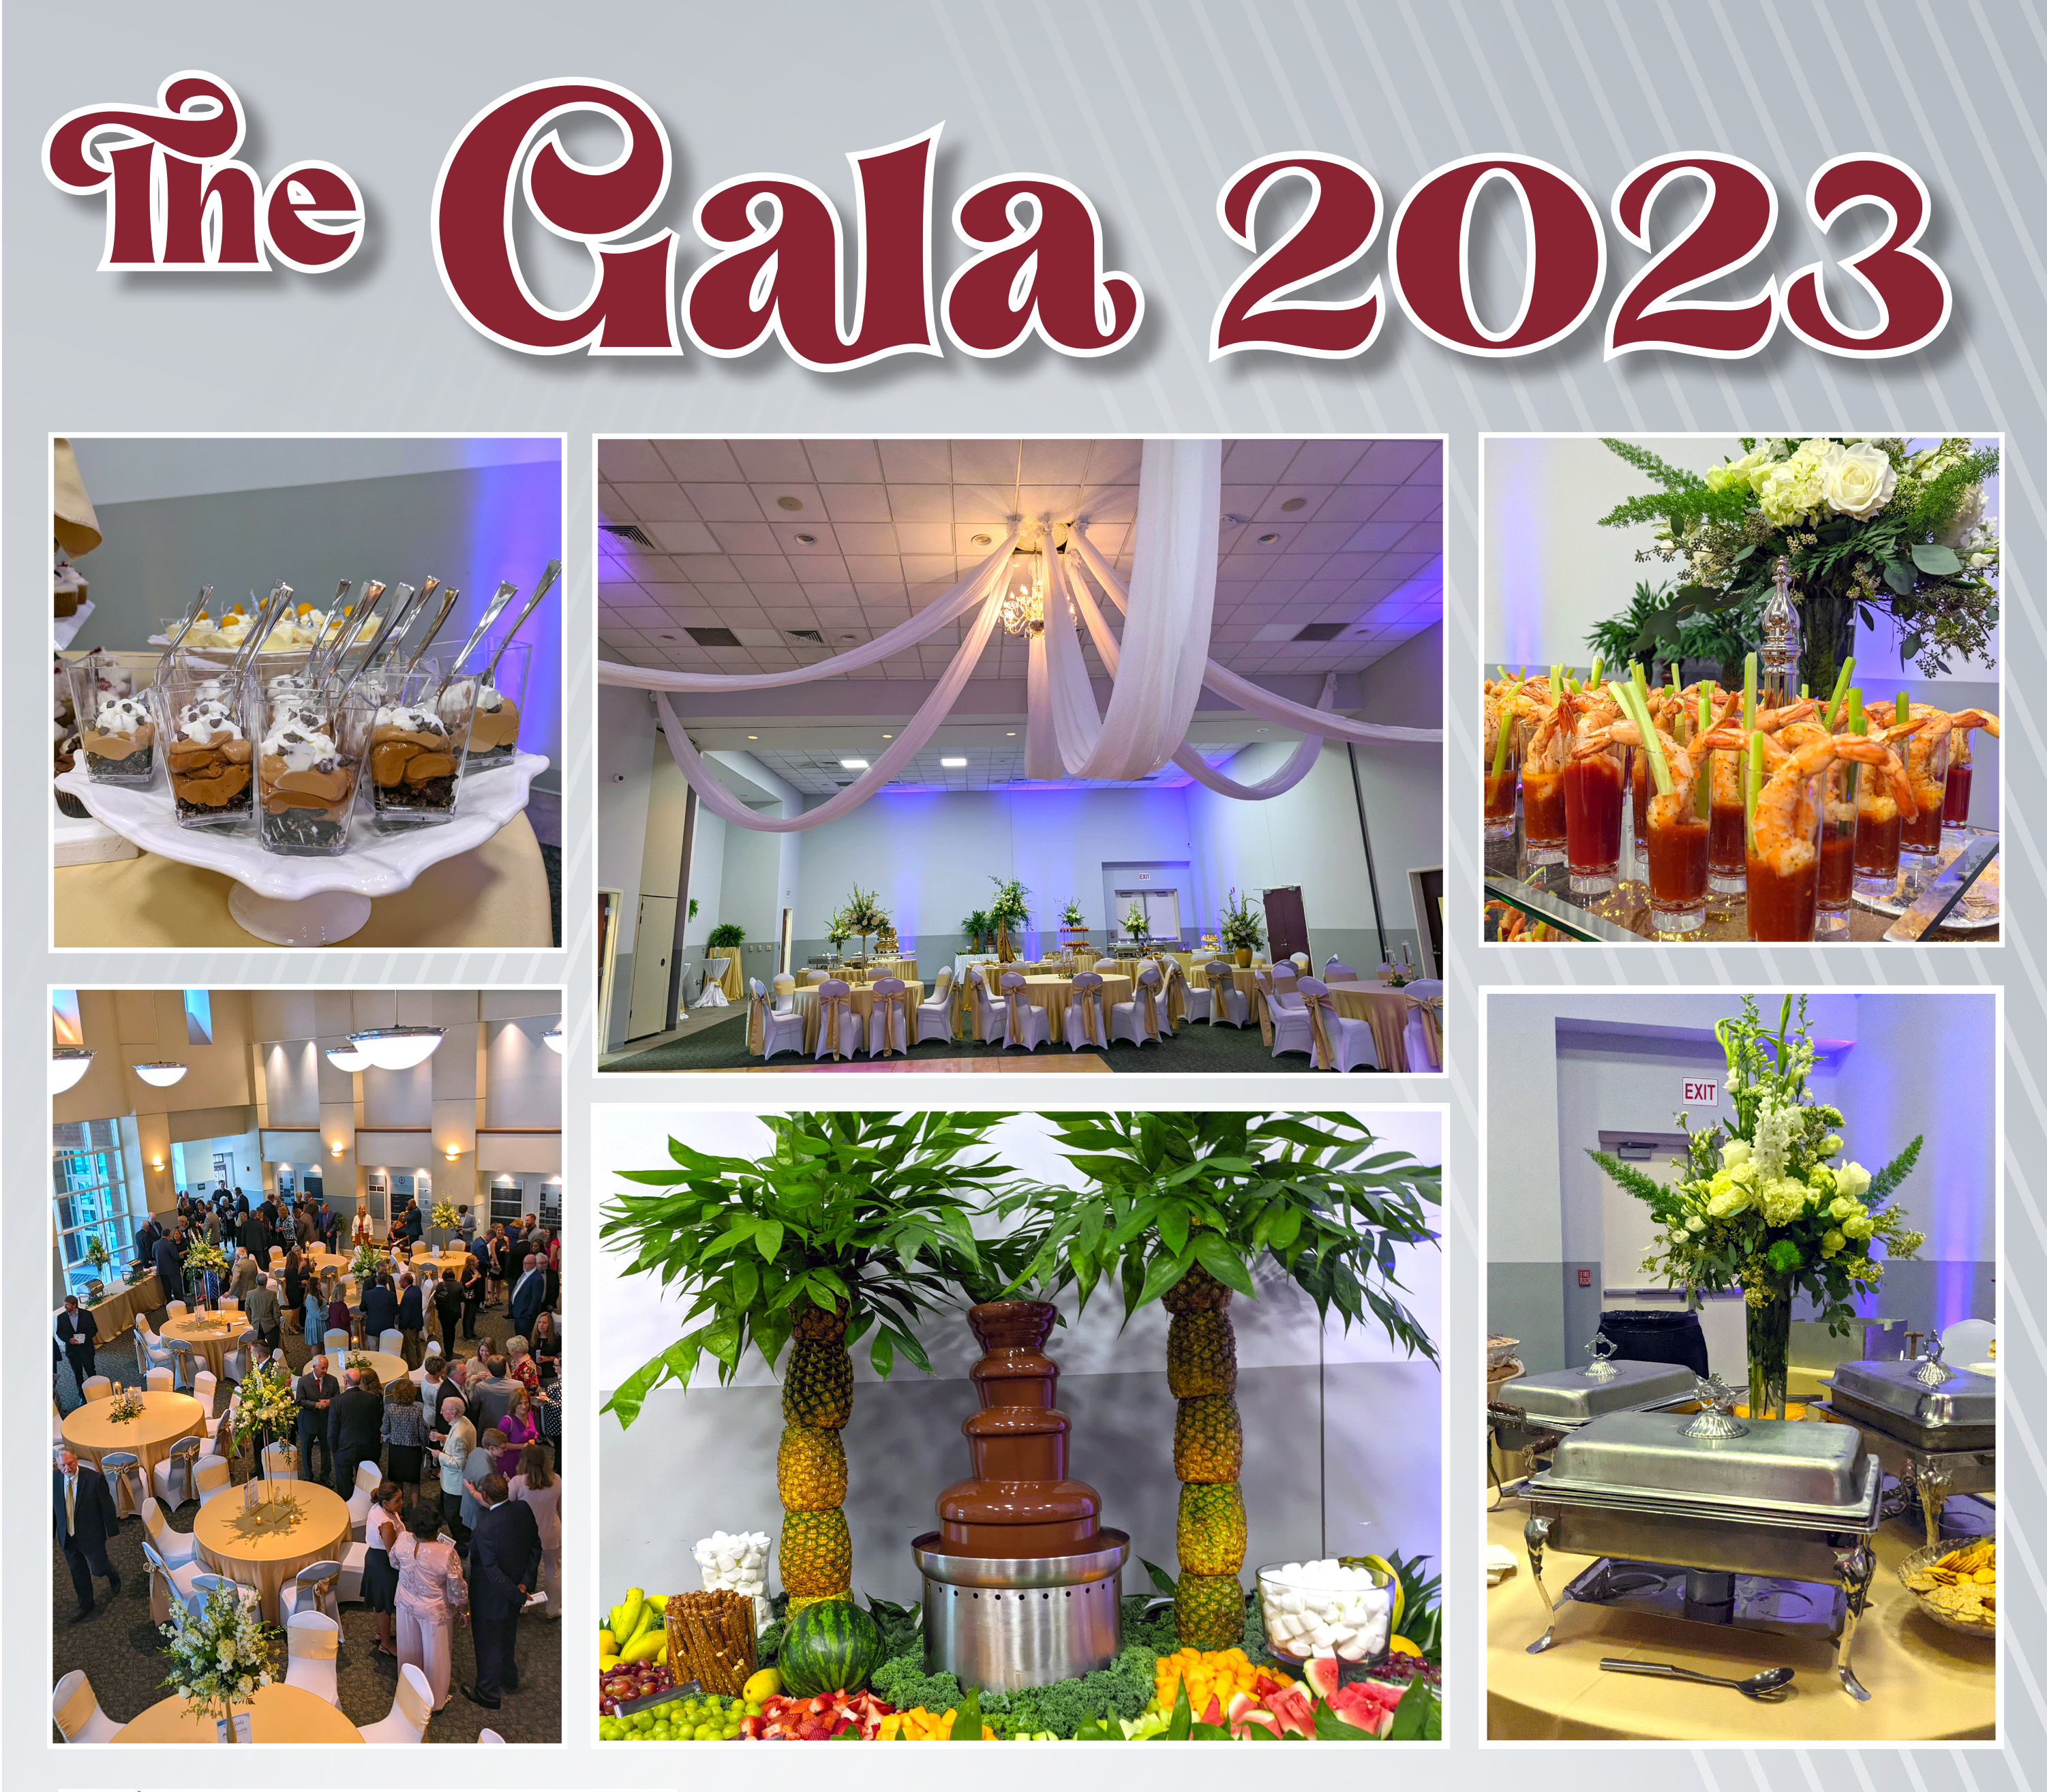 The Gala with photos